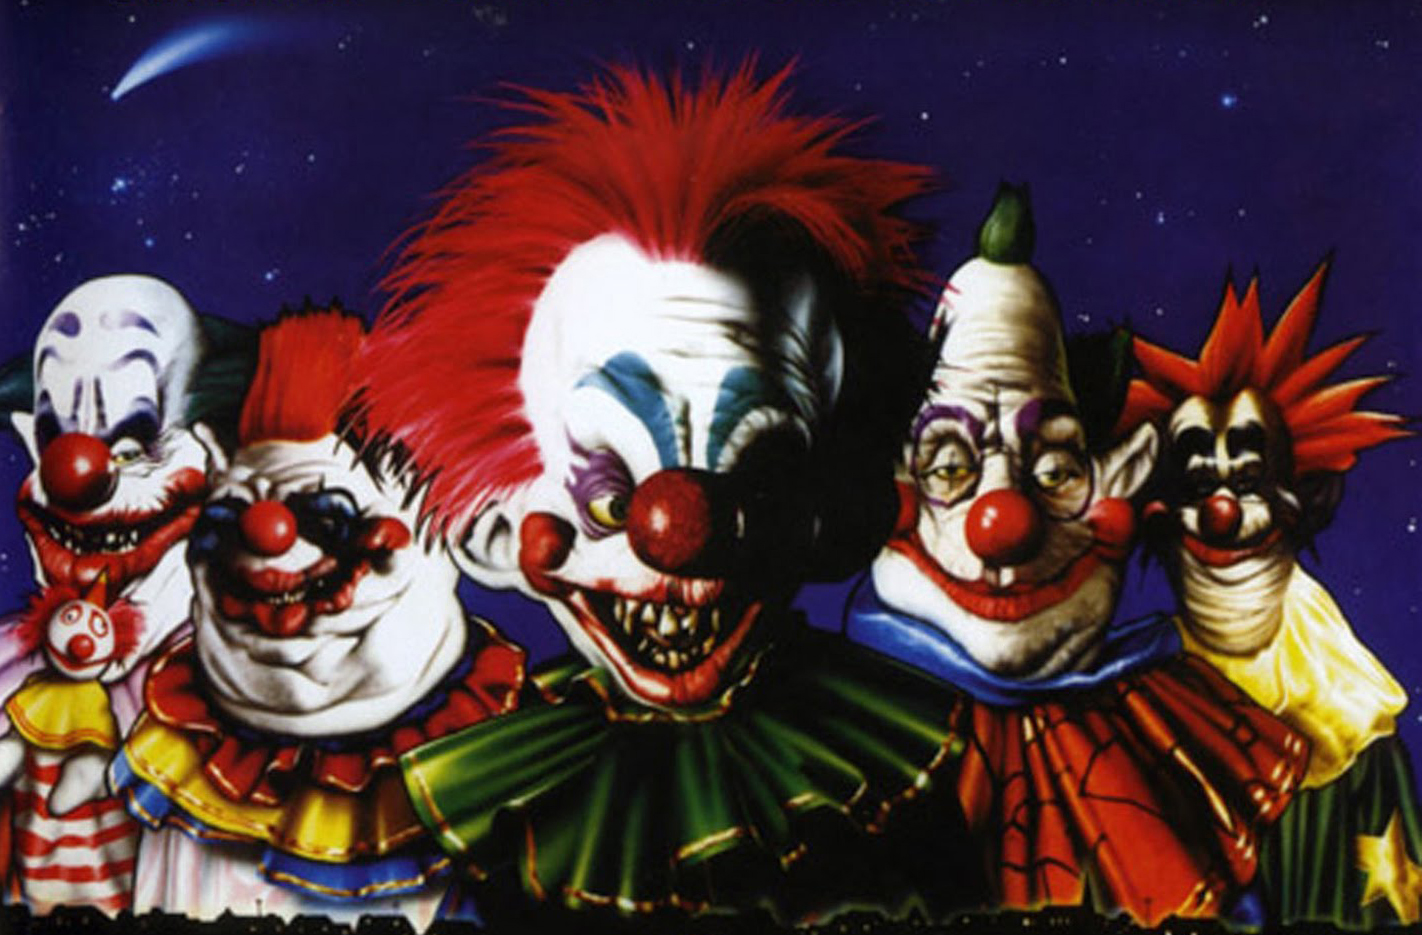 Episode 13: Killer Klowns From Outerspace